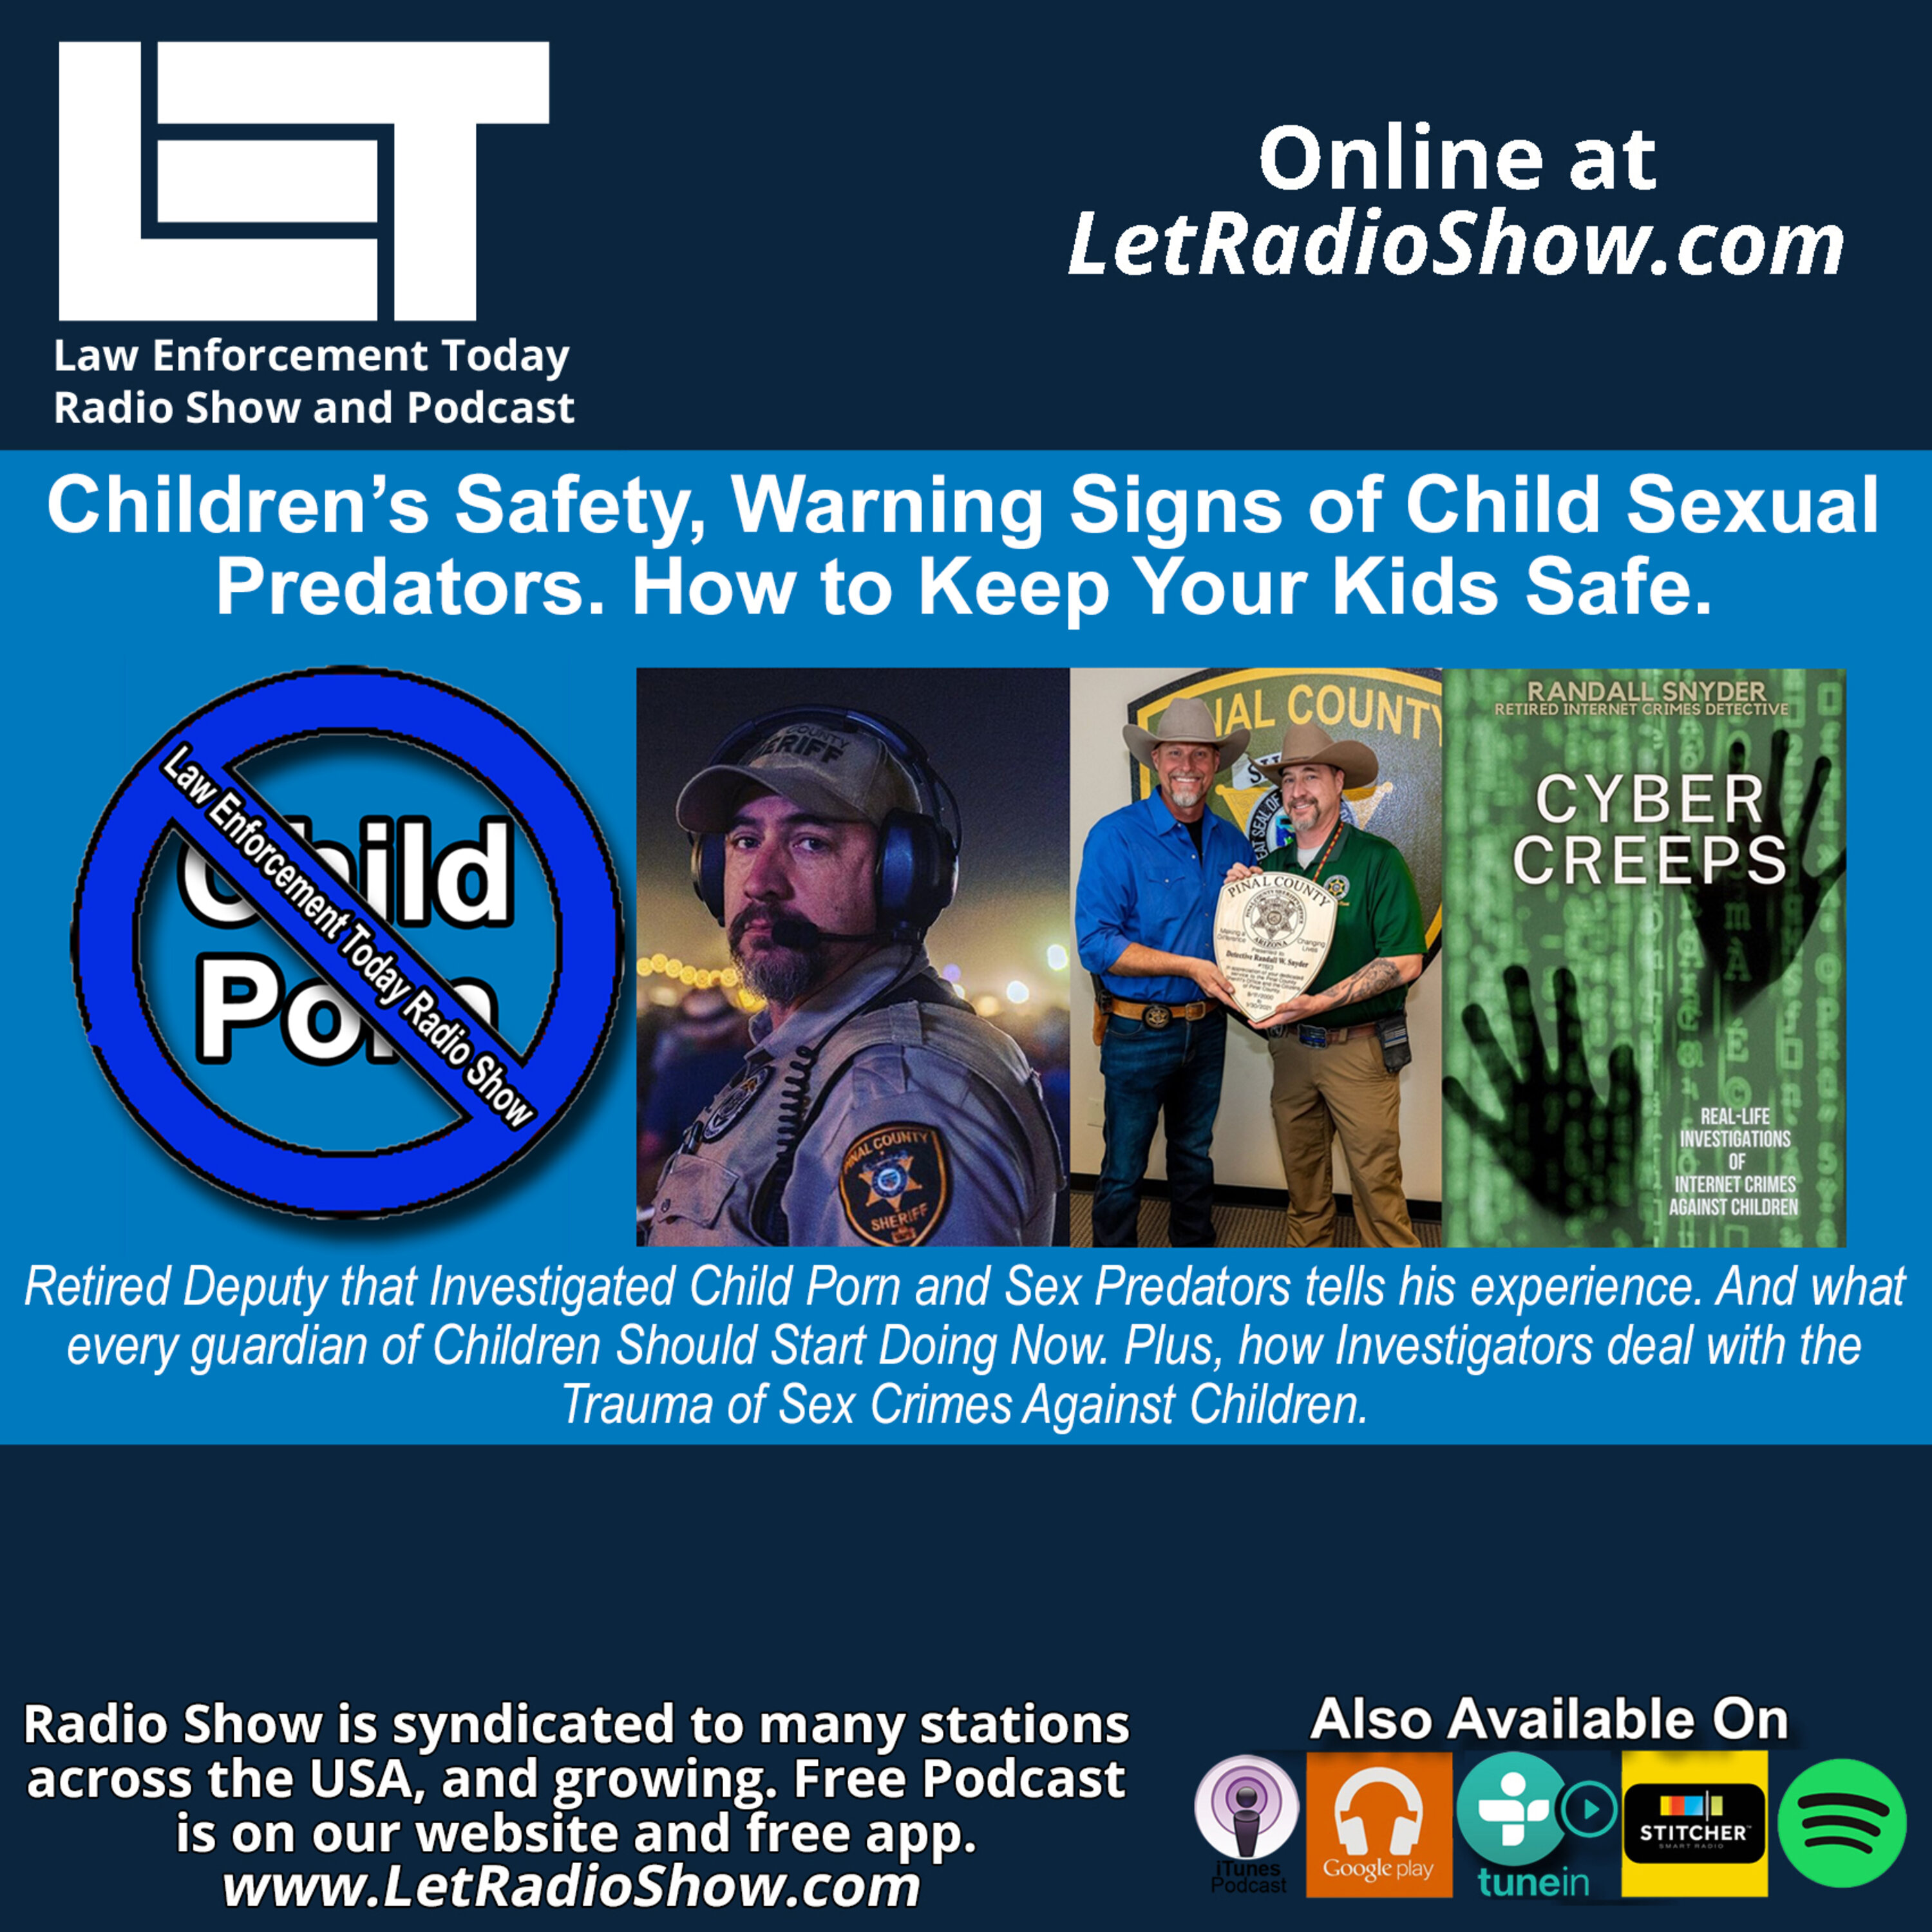 Children’s Safety, Warning Signs of Child Sexual Predators. How to Keep Your Kids Safe. Image